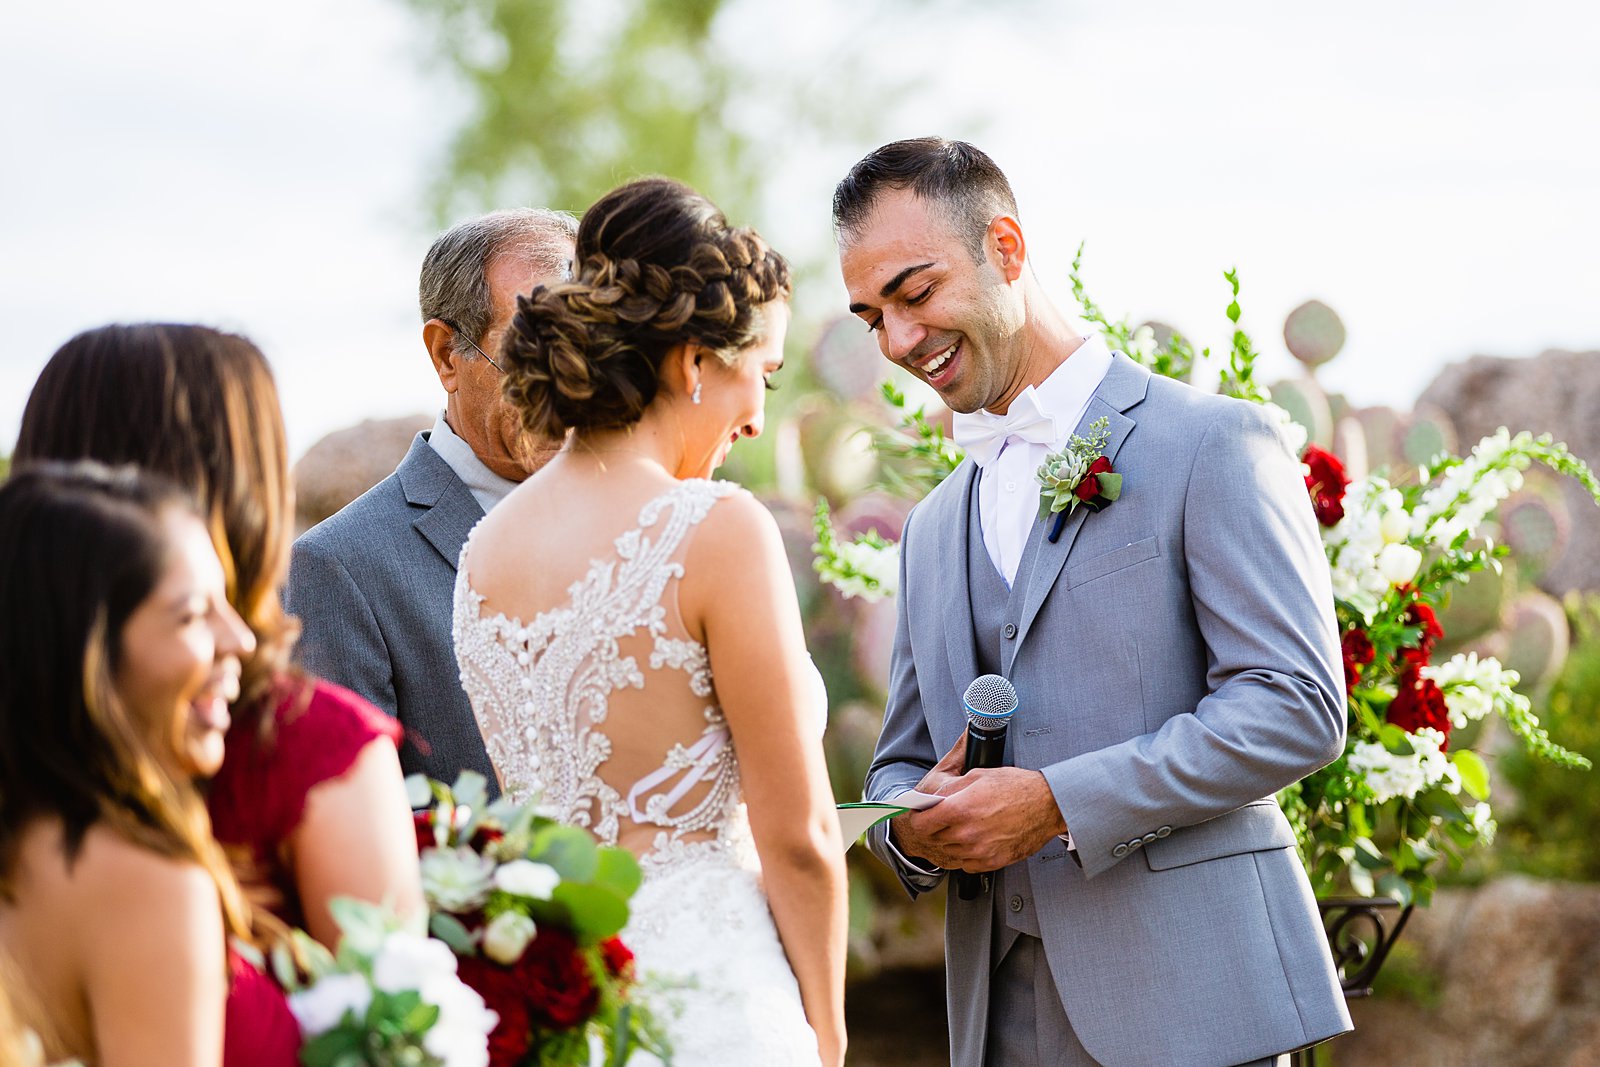 Groom smiling during his vows during a wedding ceremony by Phoenix wedding photographer PMA Photography.